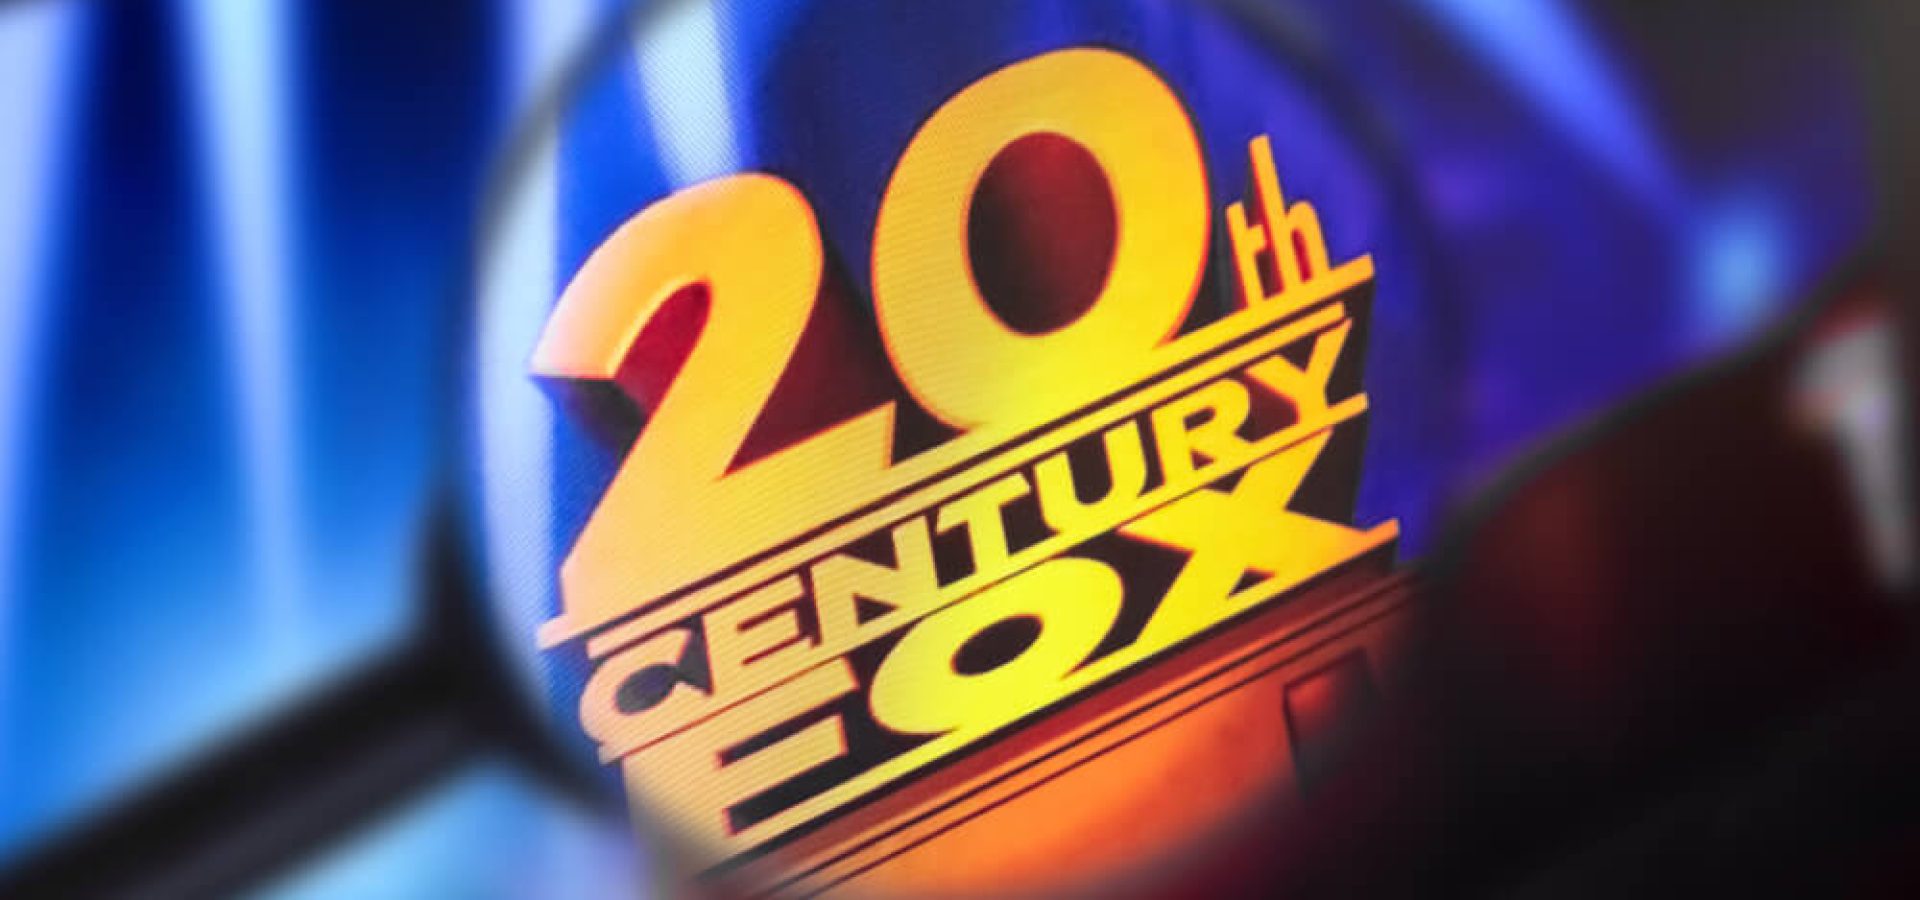 Home page of the 20th century fox